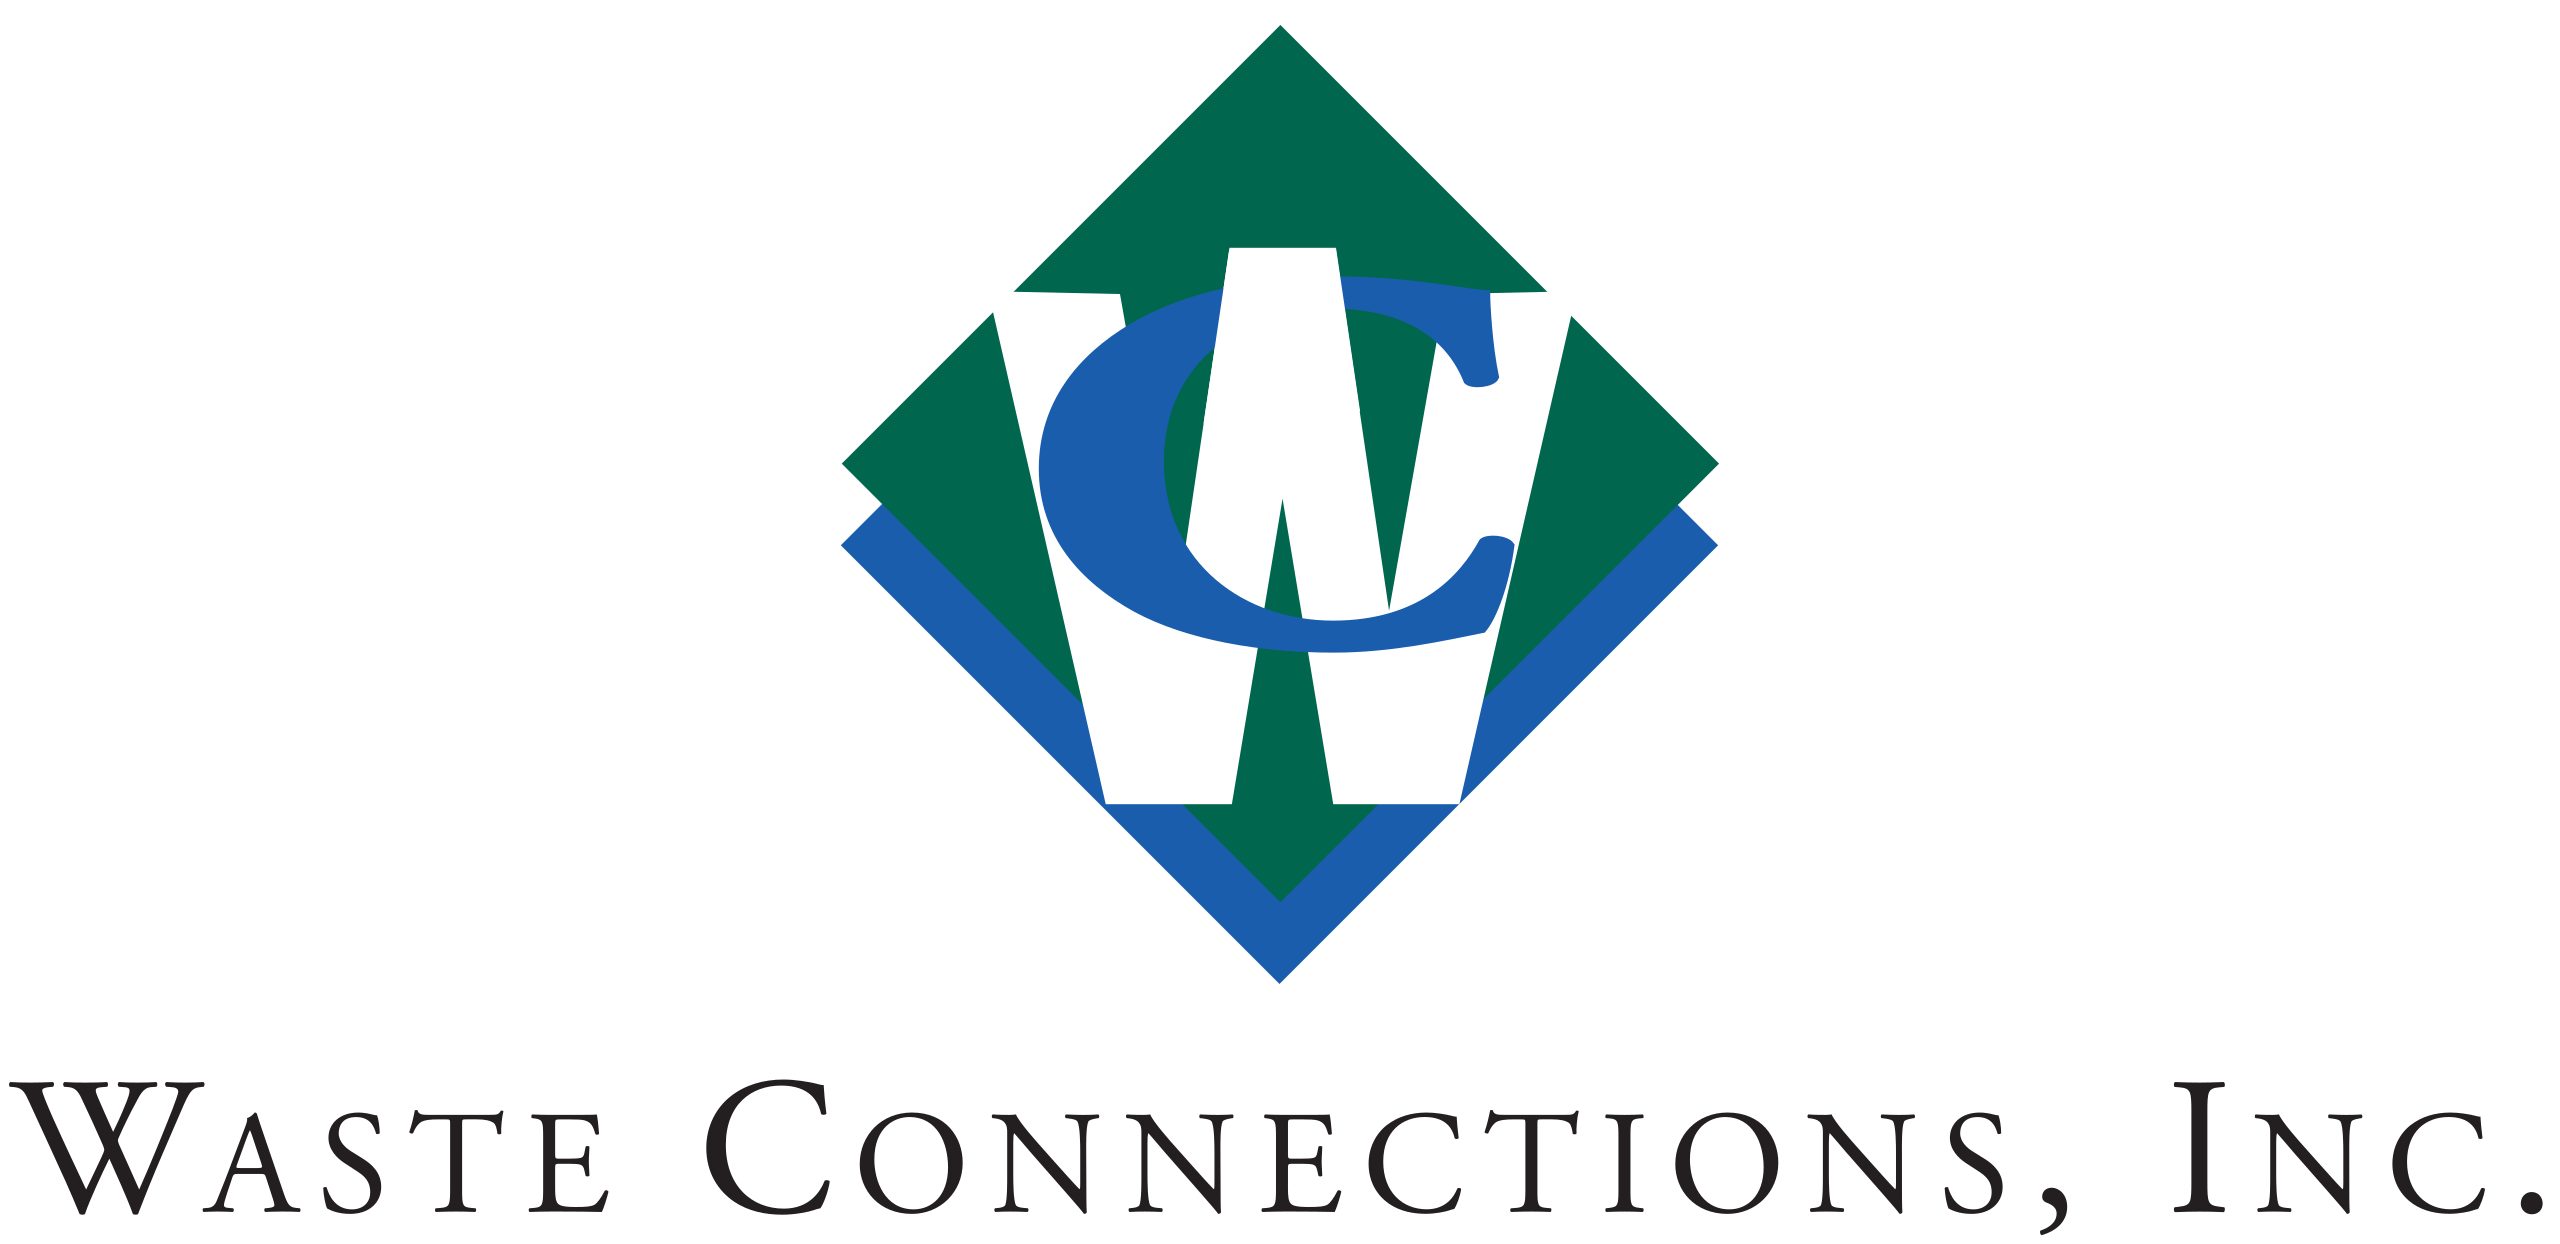 File:Waste Connections logo.svg - Wikipedia